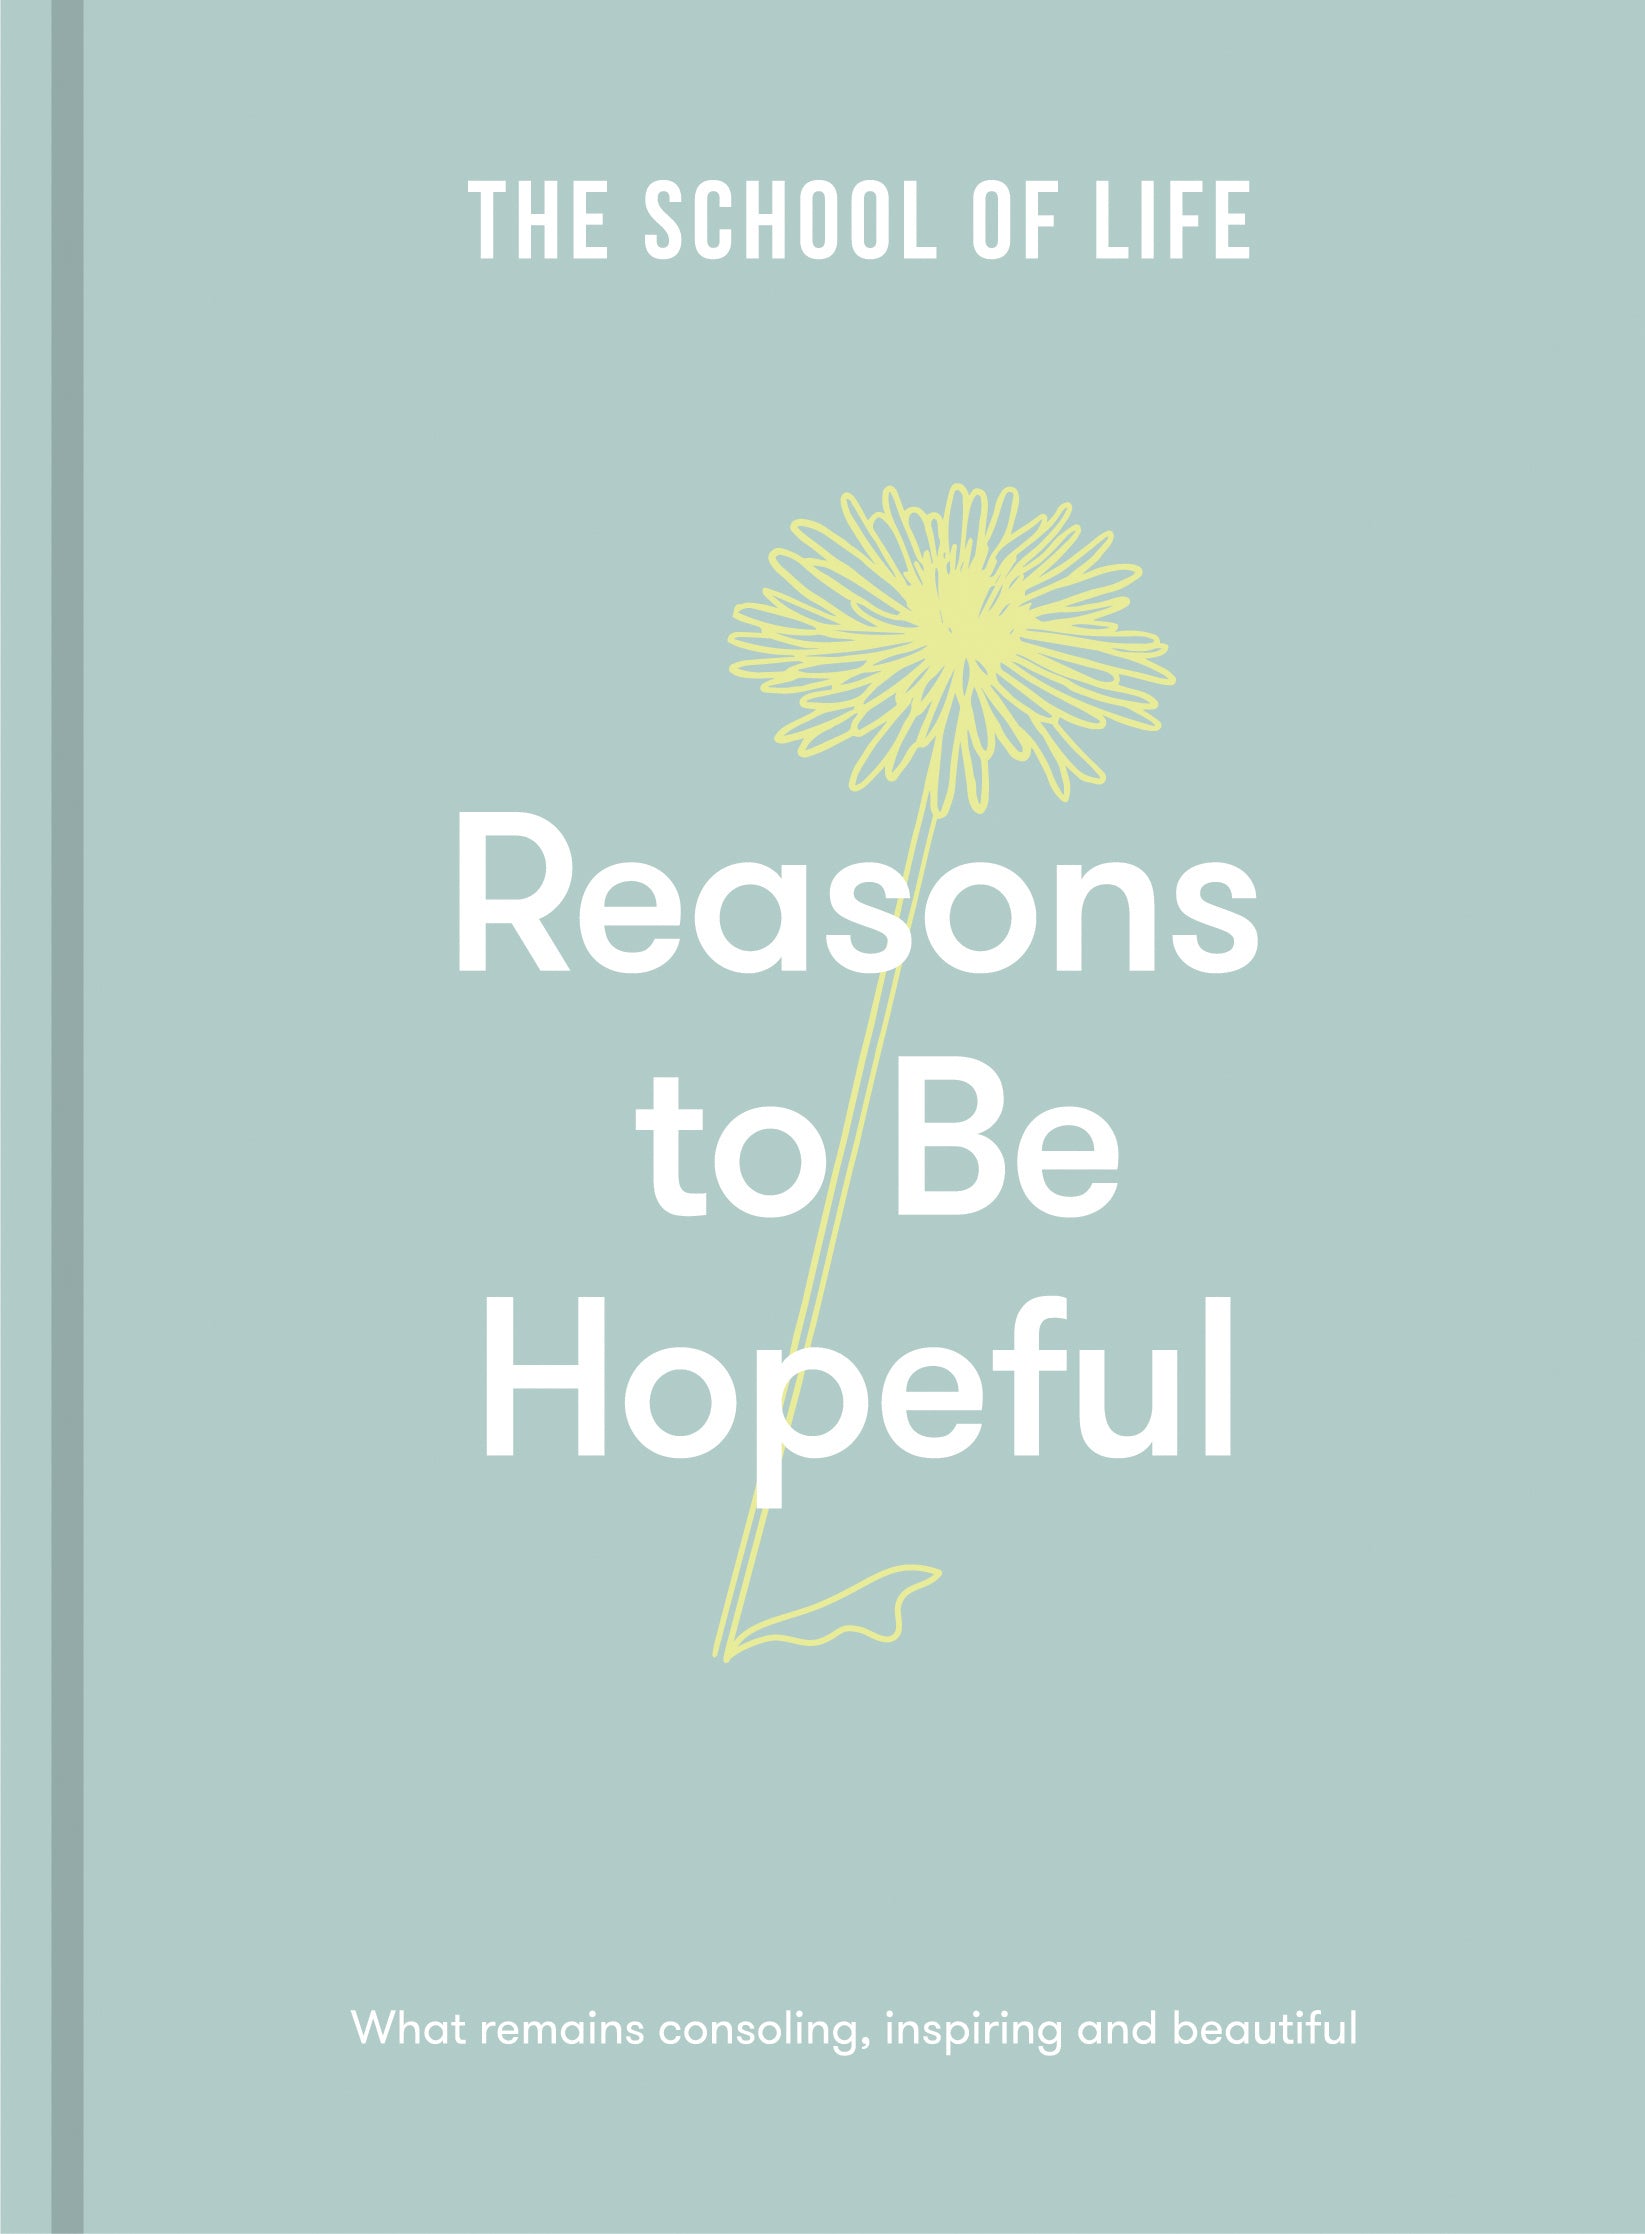 Reasons To Be Hopeful | Book | by The School of Life - Lifestory - Bookspeed